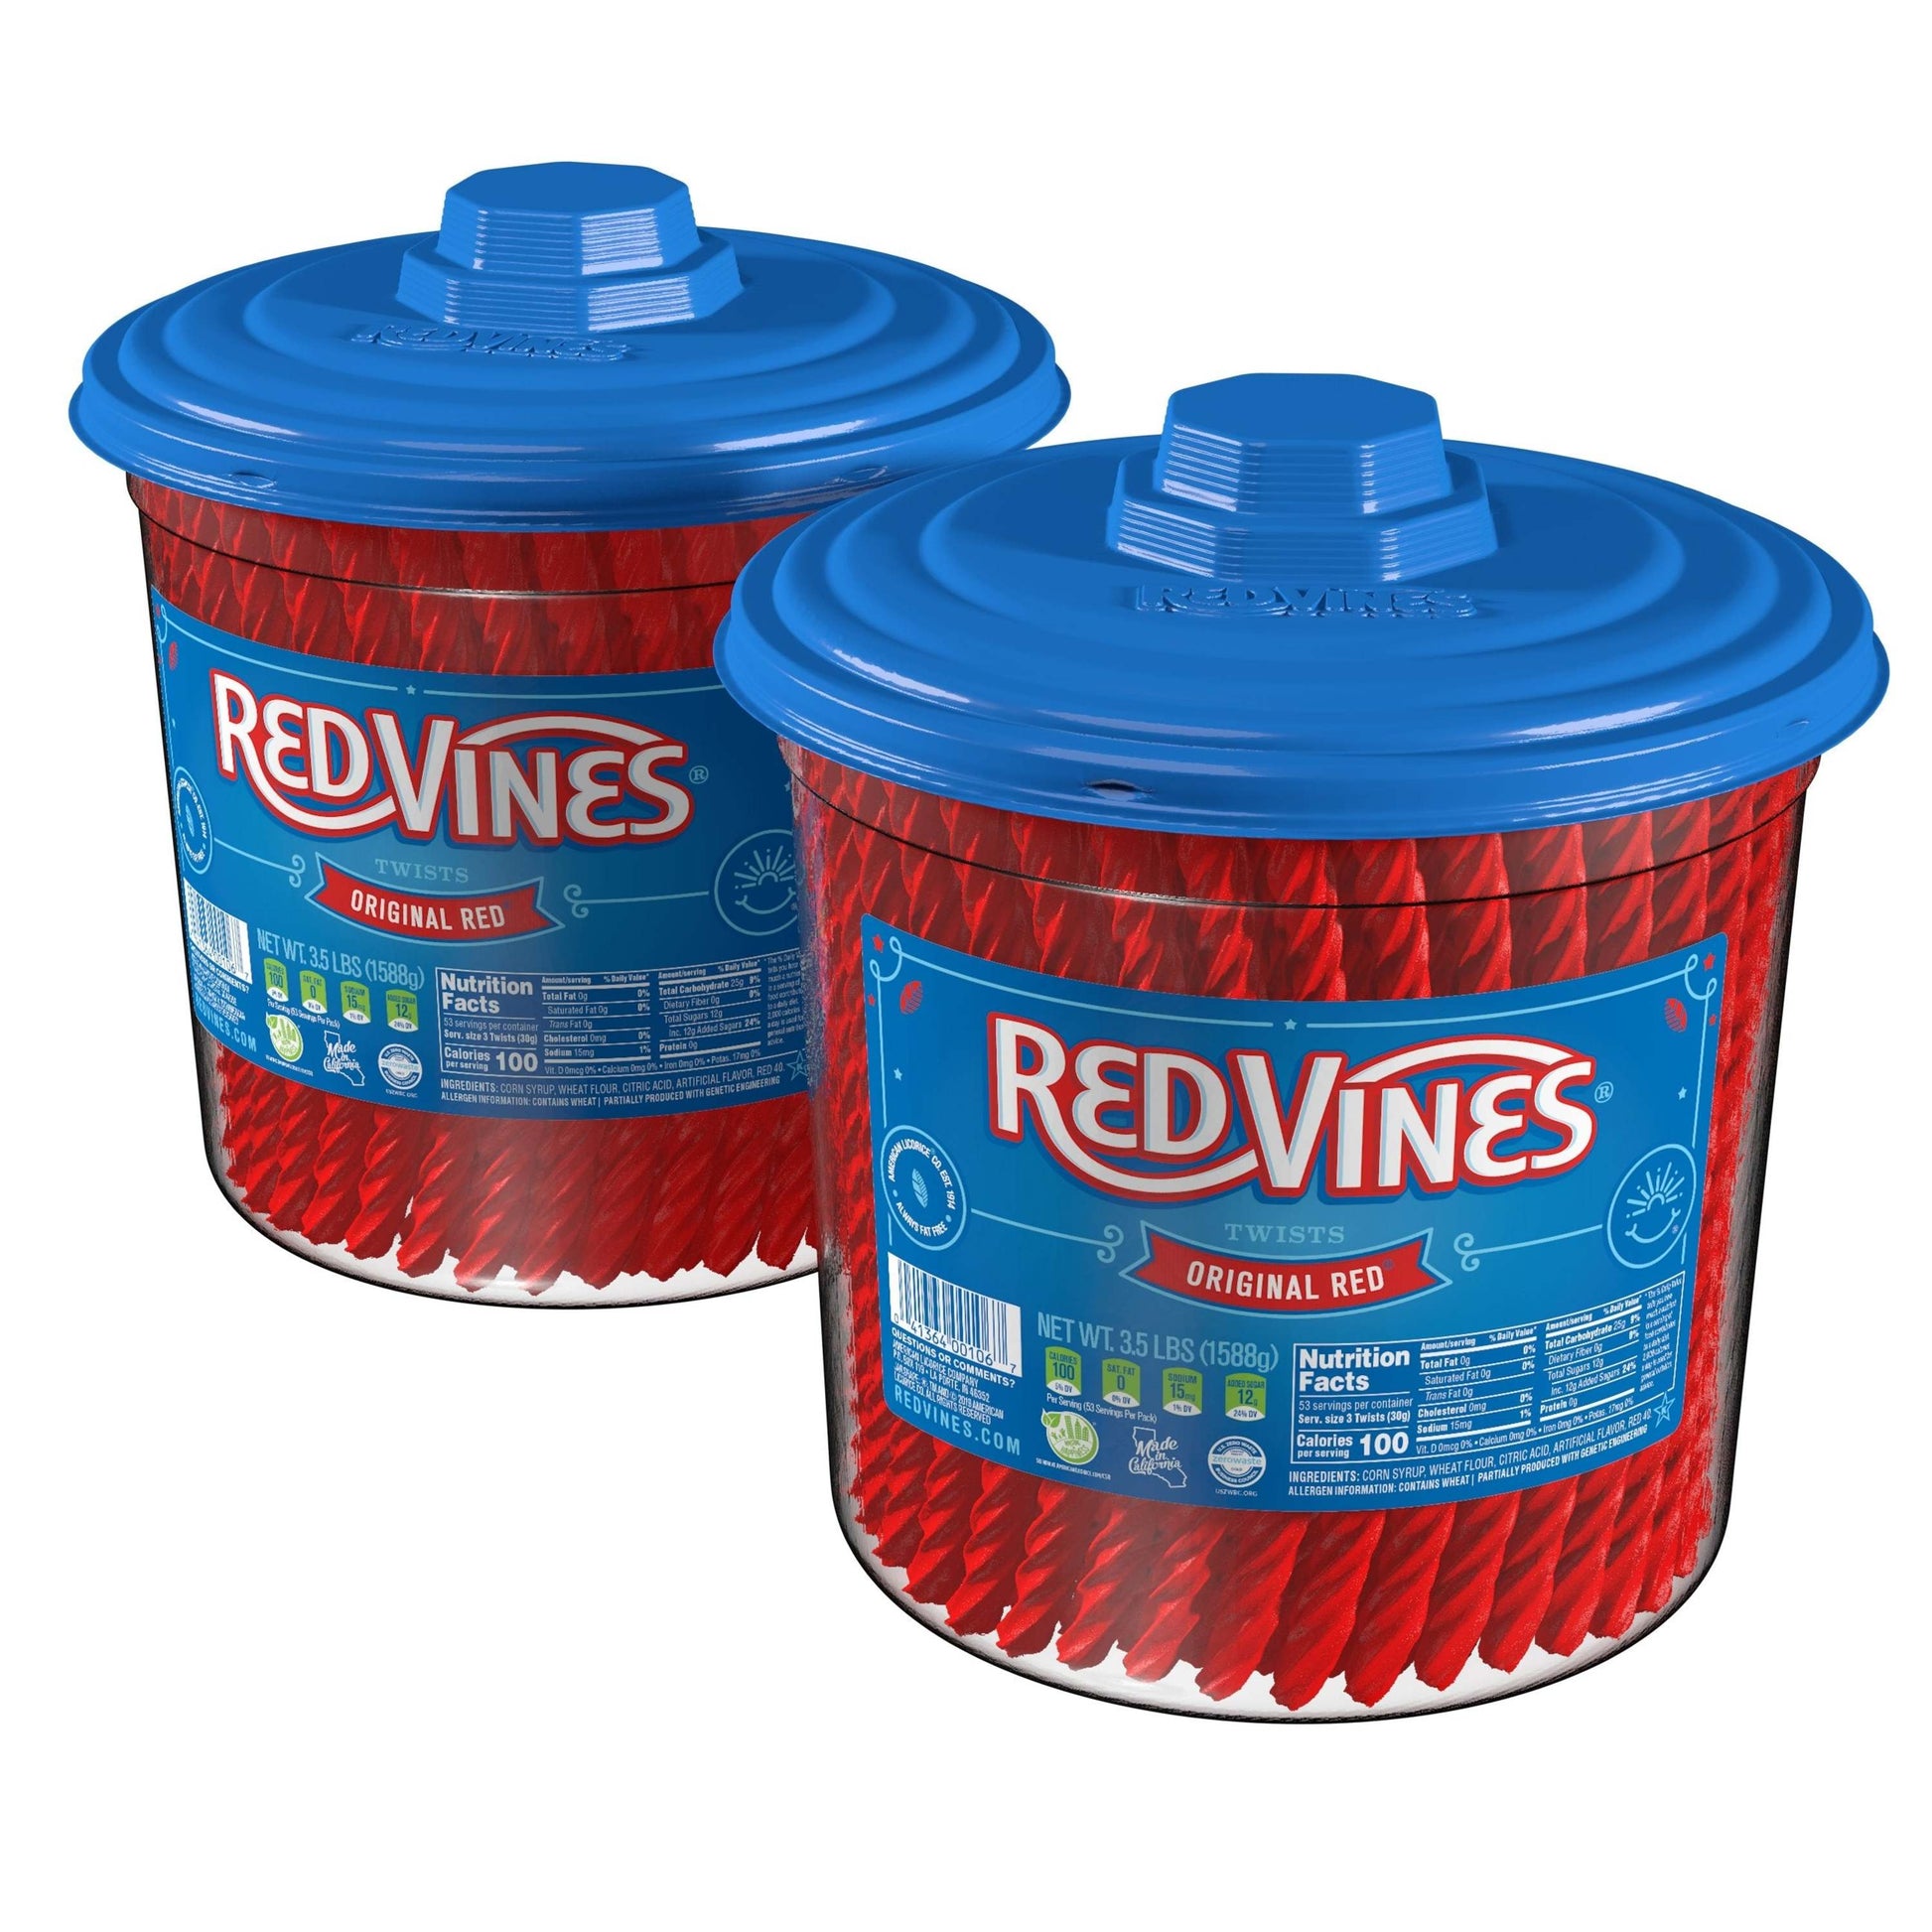 Two 3.5lb RED VINES Original Red Licorice Candy Jars